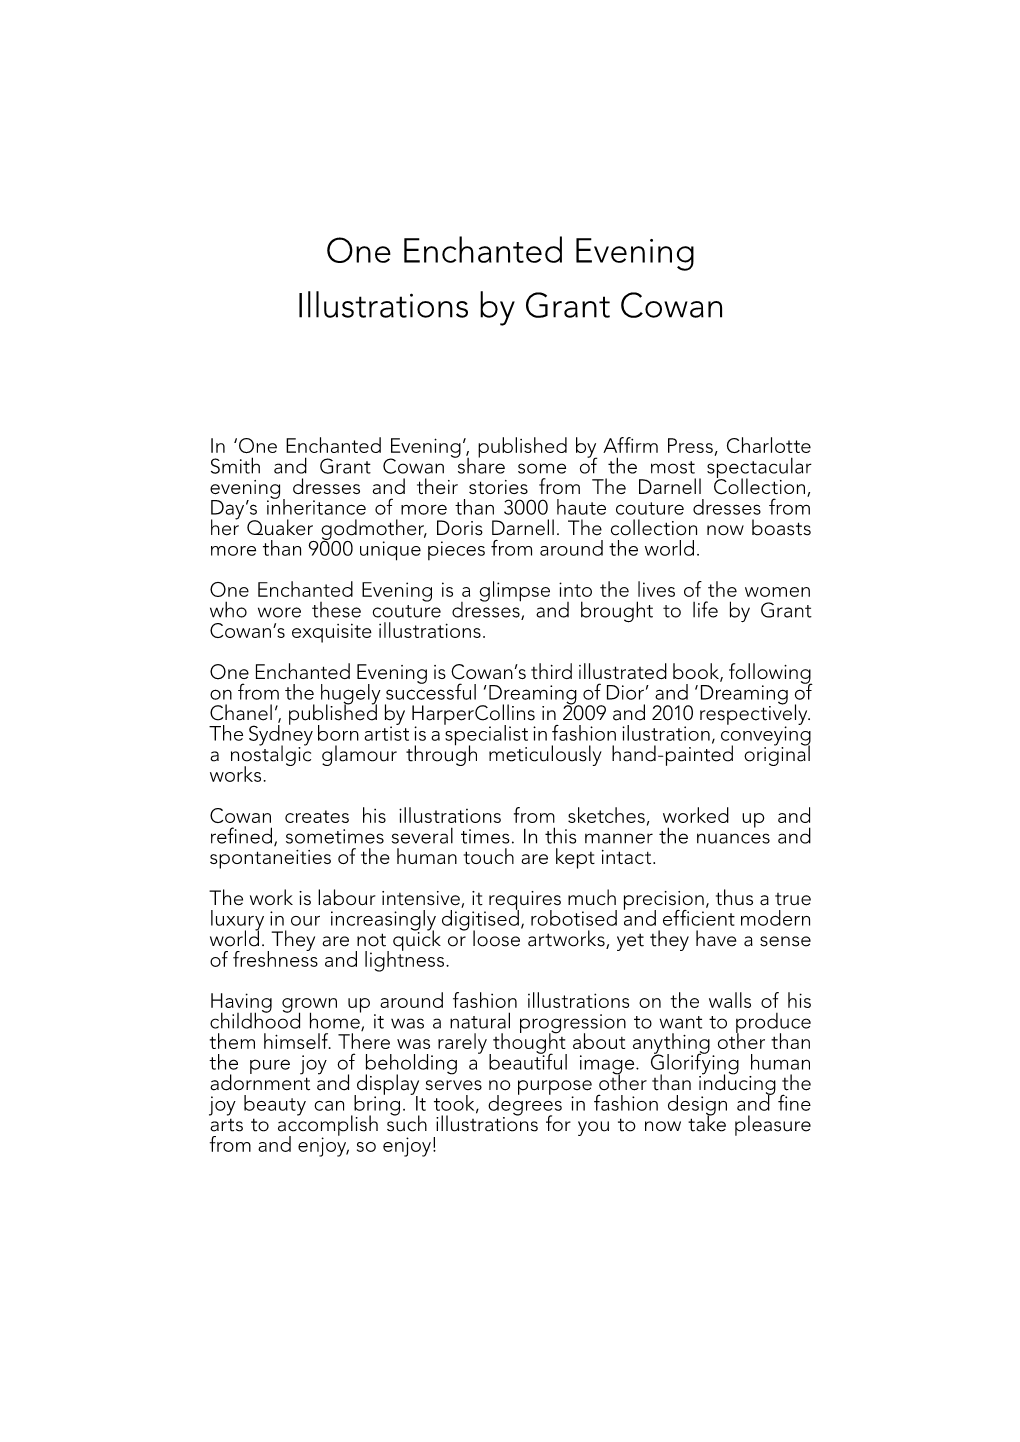 One Enchanted Evening Illustrations by Grant Cowan